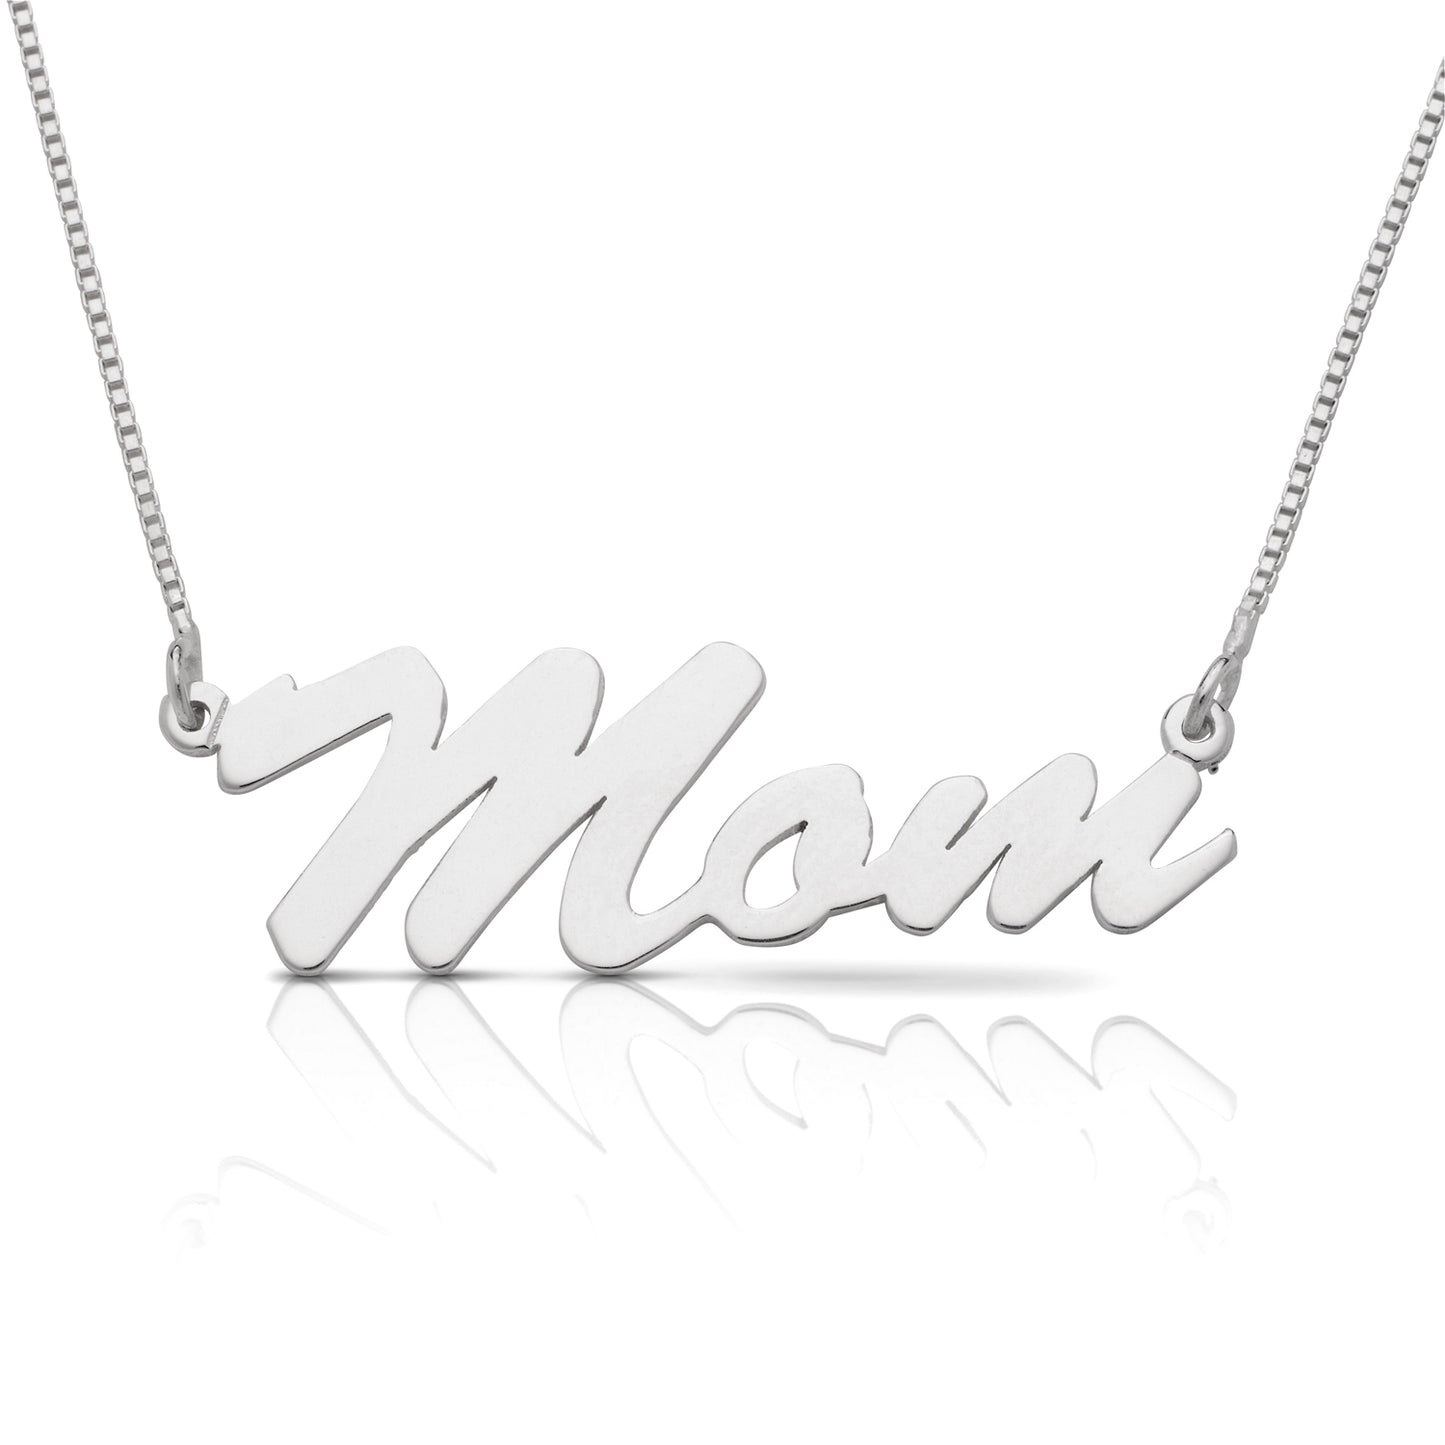 Better Jewelry Personalized .925 Sterling Silver Glossy Script Name Necklace (MADE IN USA)